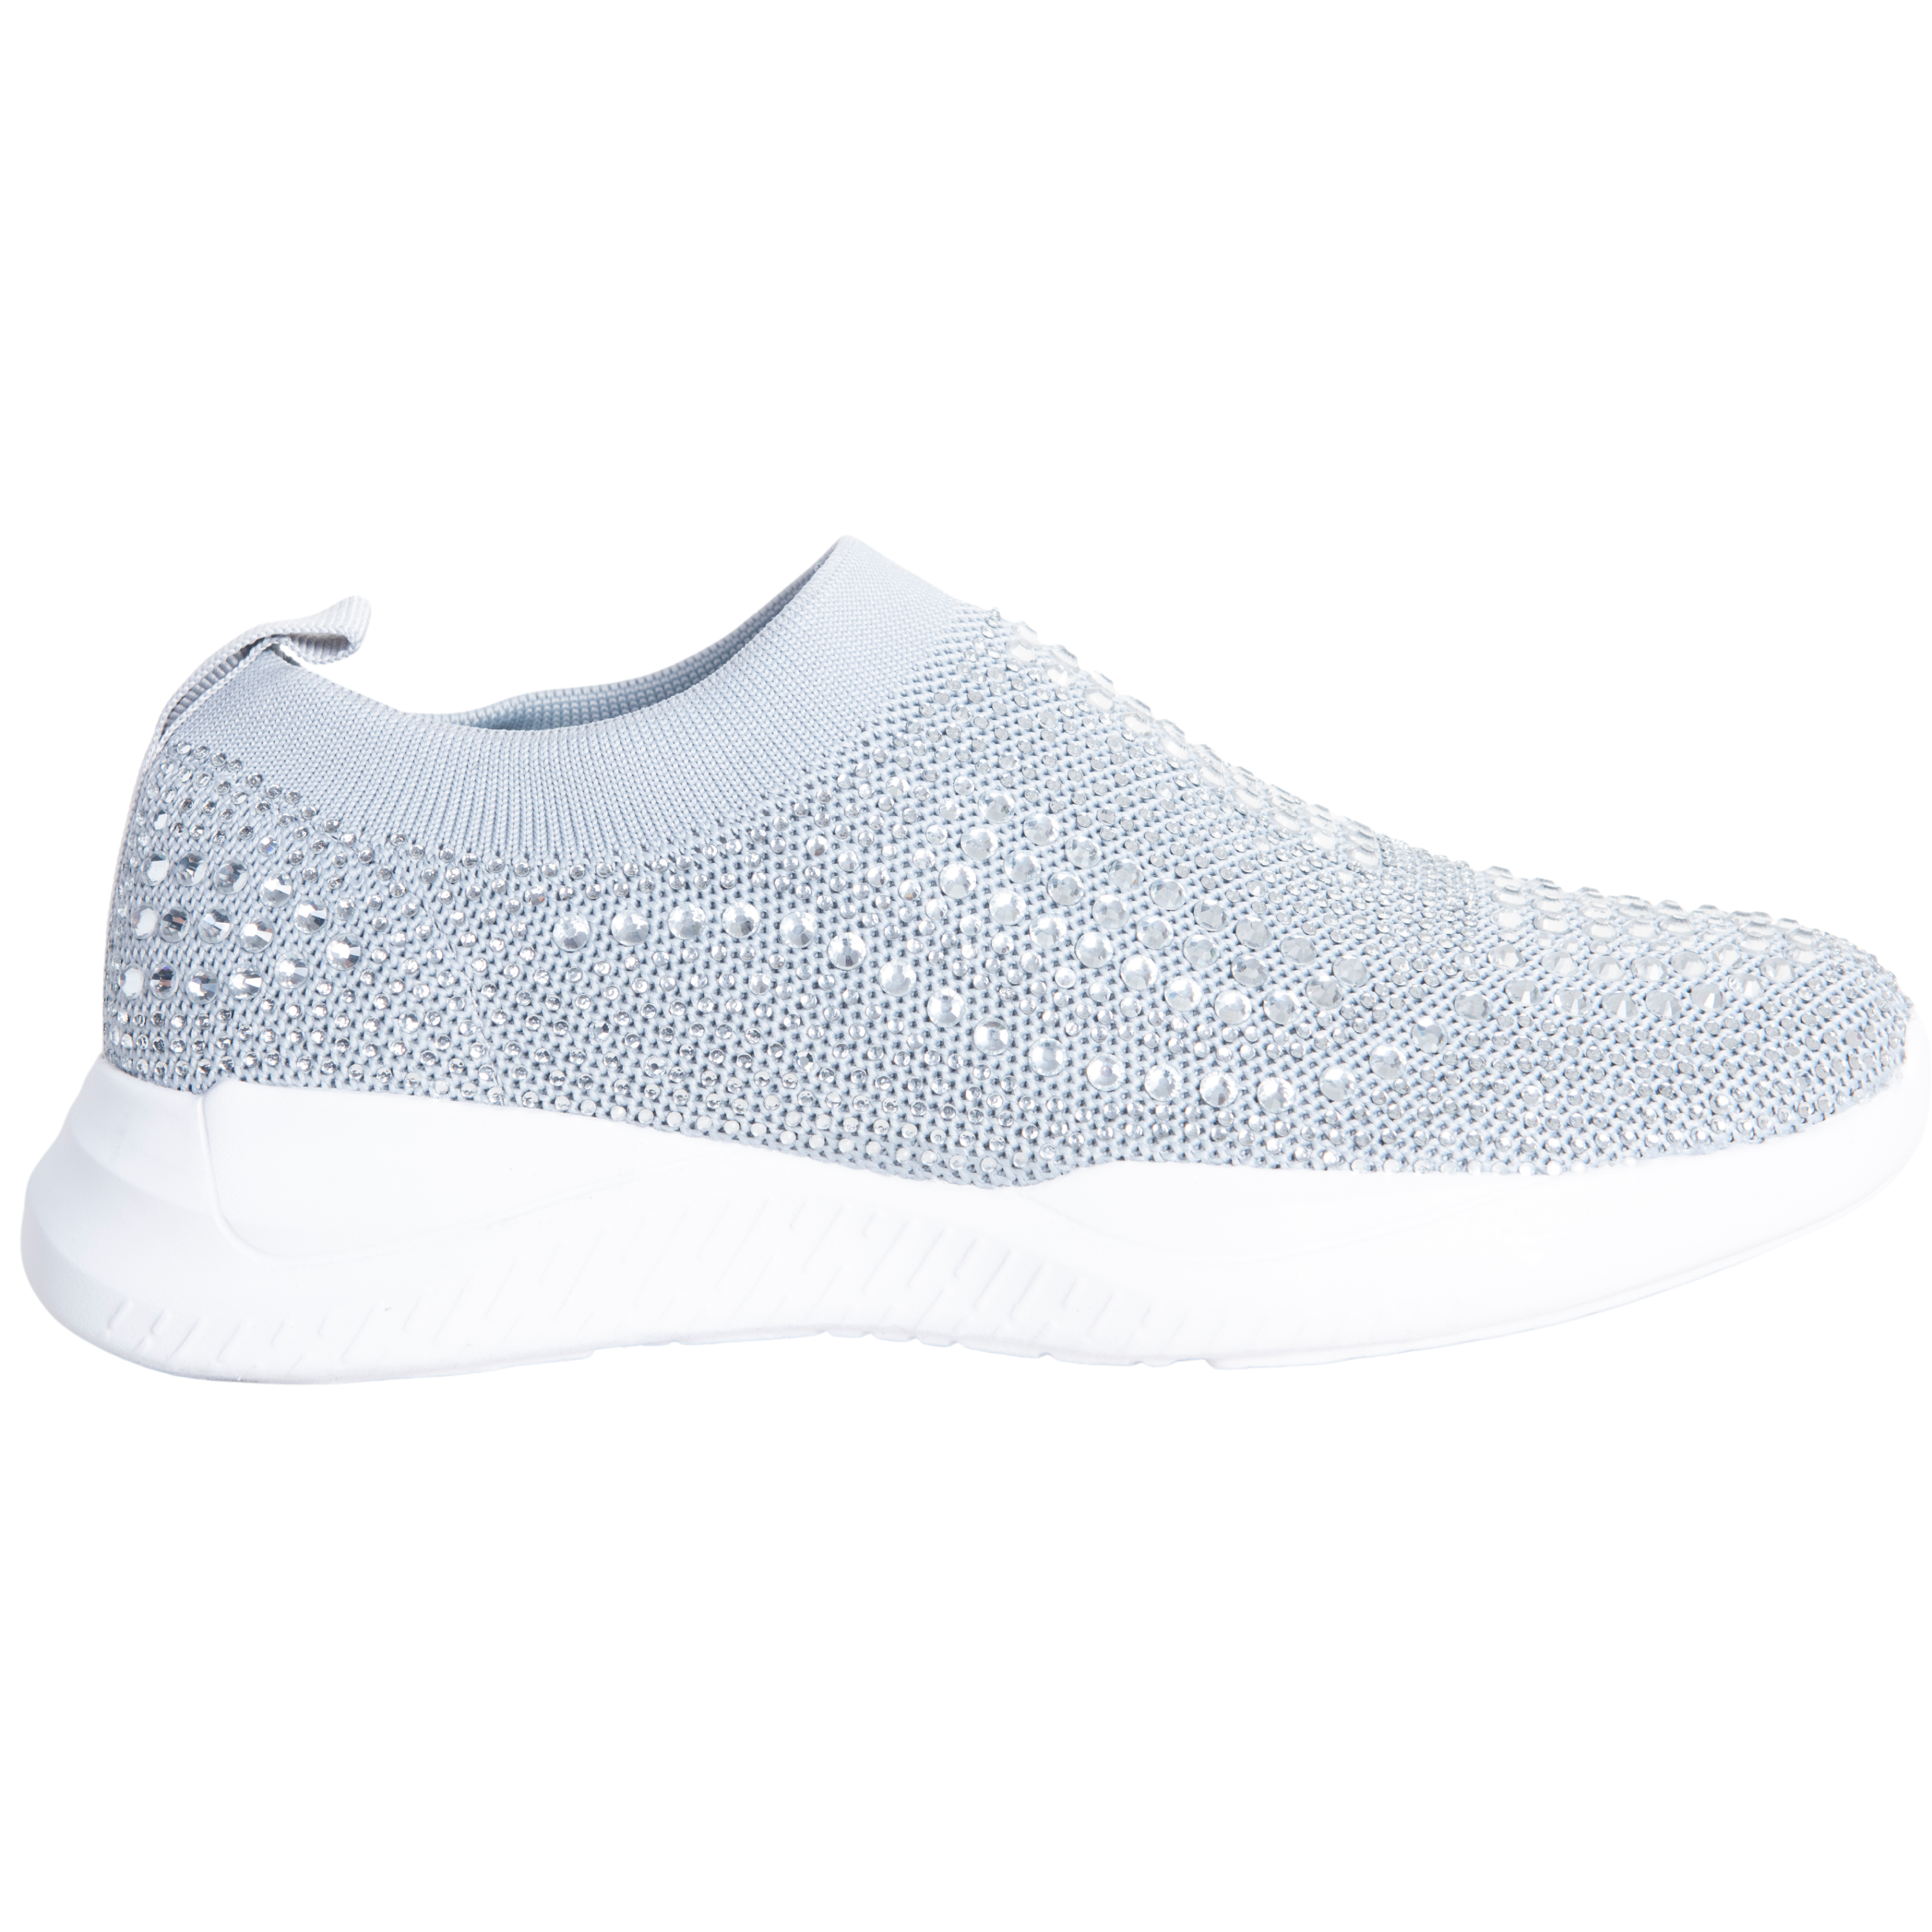 CARMI SNEAKERS WITH SPARKLY RHINESTONE EMBELLISHED